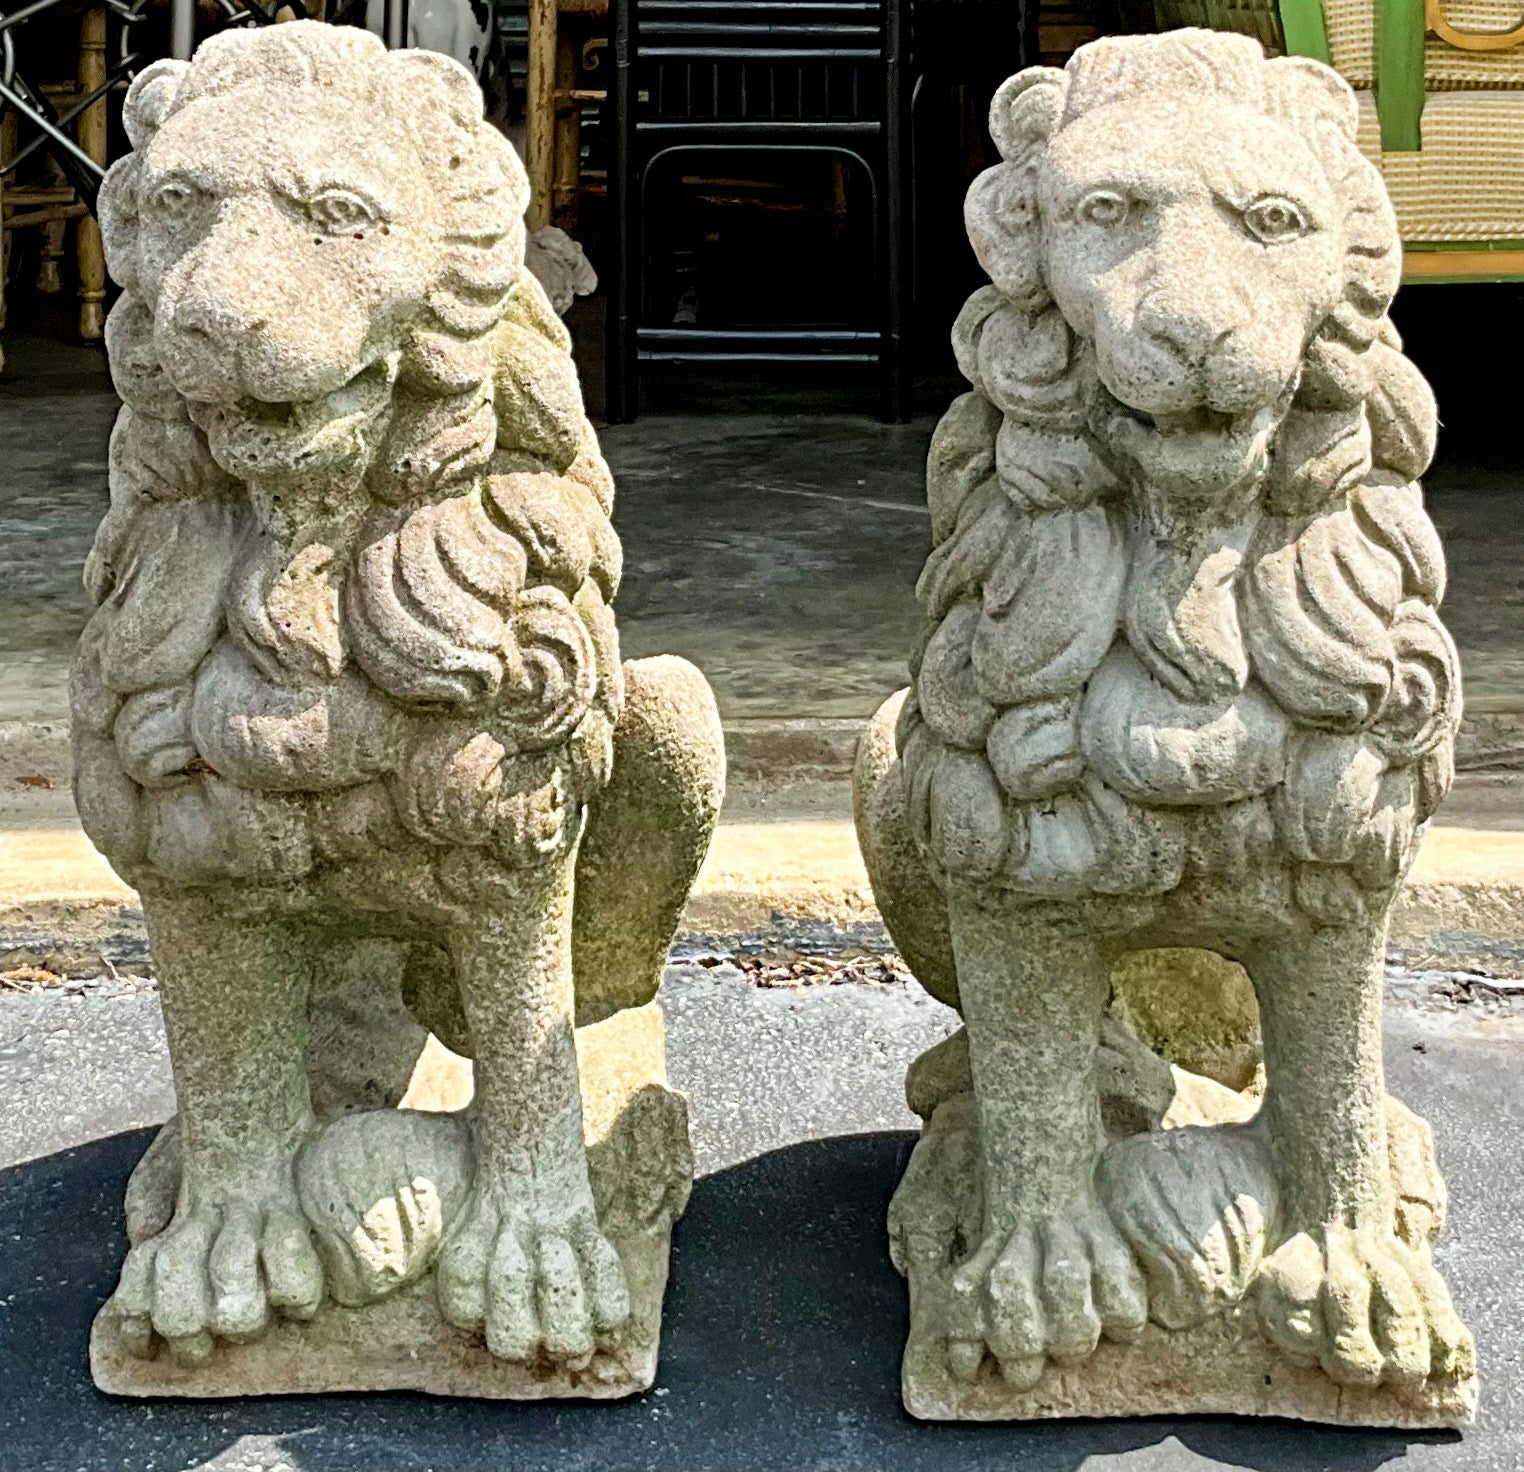 This is a nicely casted English garden style pair of seated concrete lions. The lions have curly manes and a circling tail. They are in very good condition.